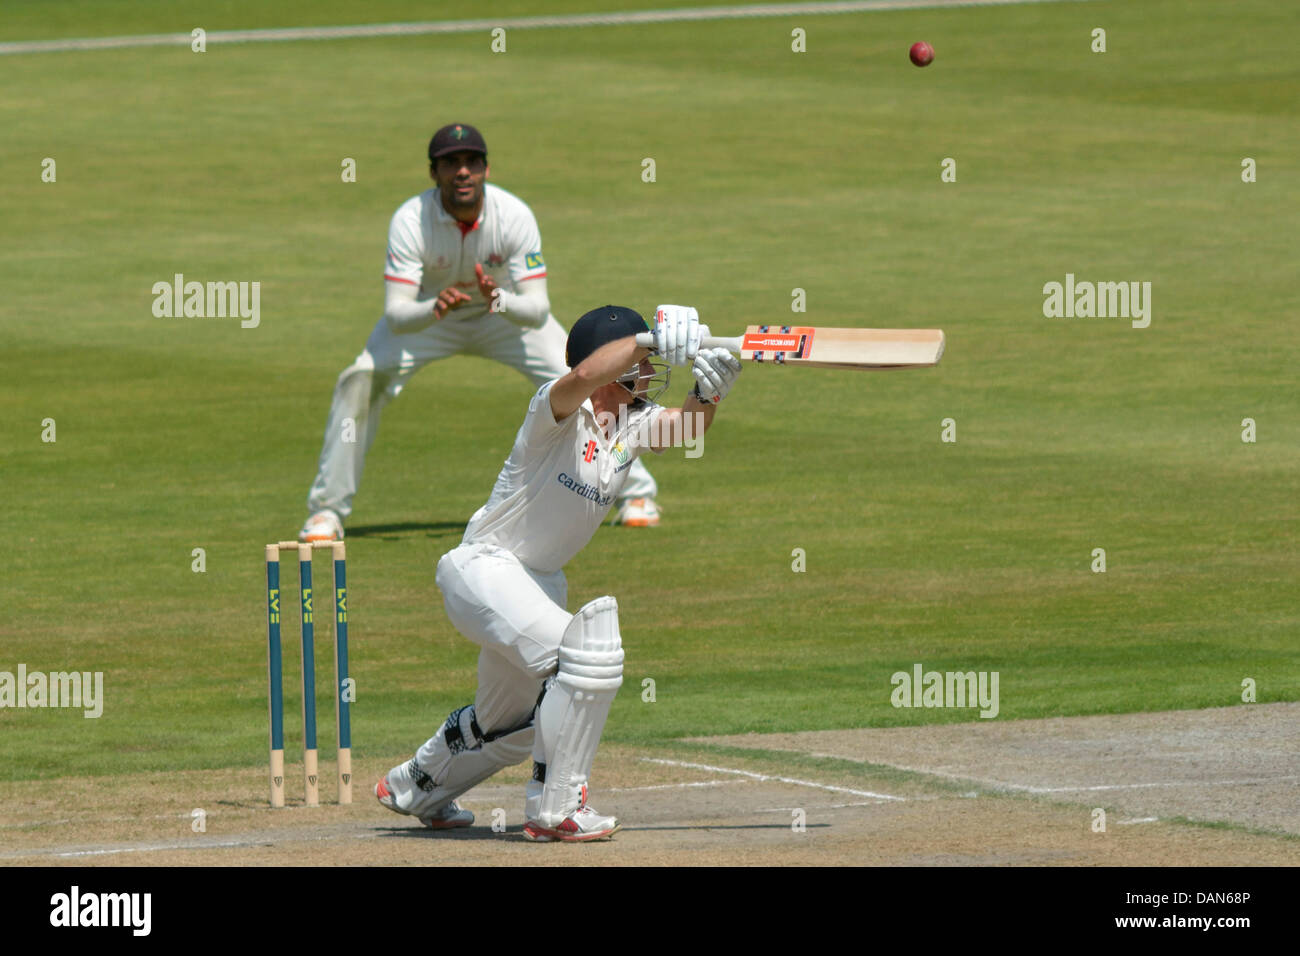 Manchester, UK. 16th July, 2013. Mark Wallace (Glamorgan) edges the ball over the slip fielder on the second day of the 4 day match against Lancashire. Lancashire v Glamorgan Emirates Old Trafford, Manchester, UK 16 July 2013 Credit:  John Fryer/Alamy Live News Stock Photo